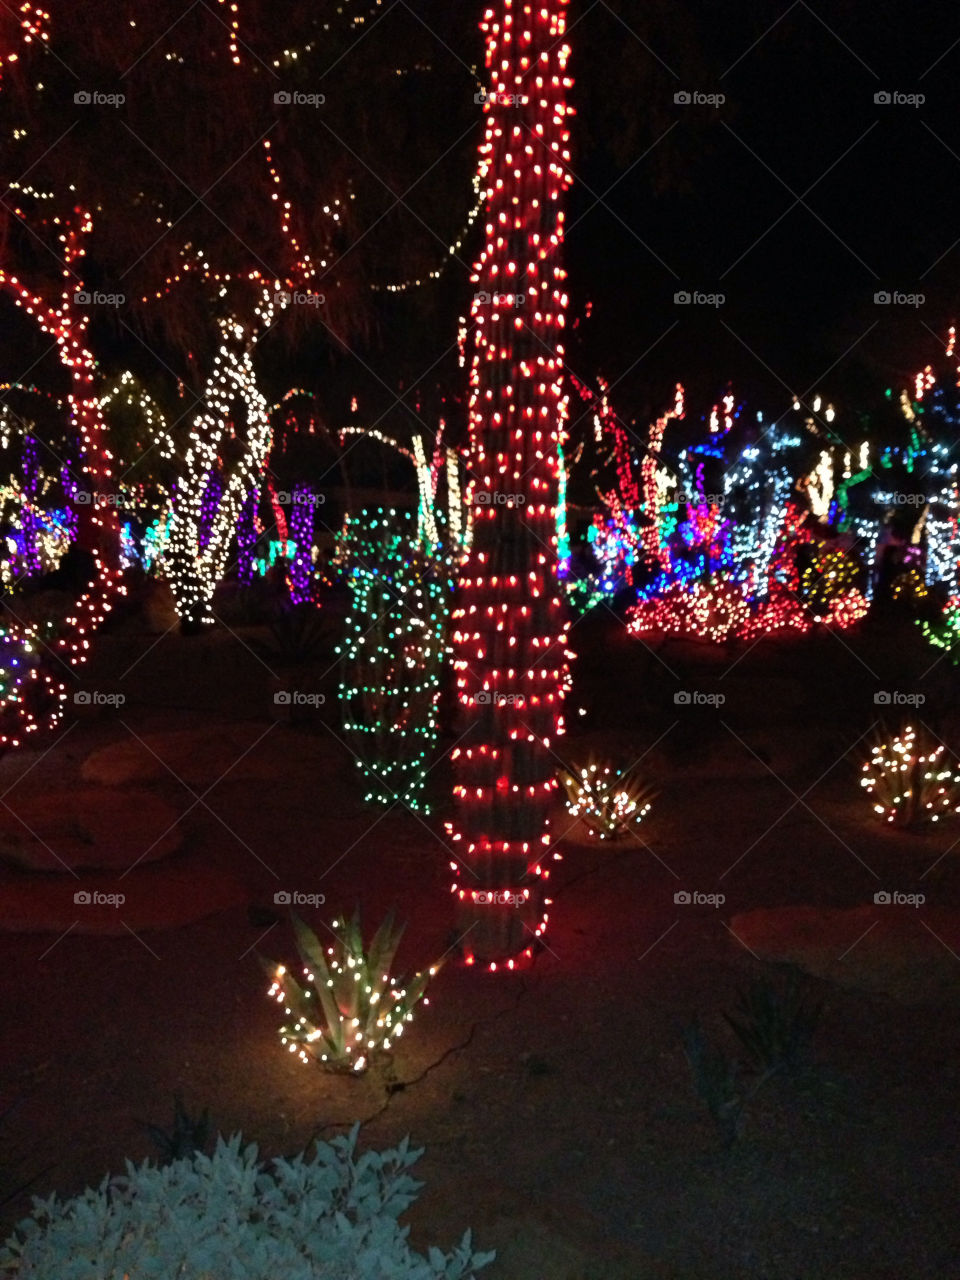 ethel m factory christmas christmas lights ethel m by snook911